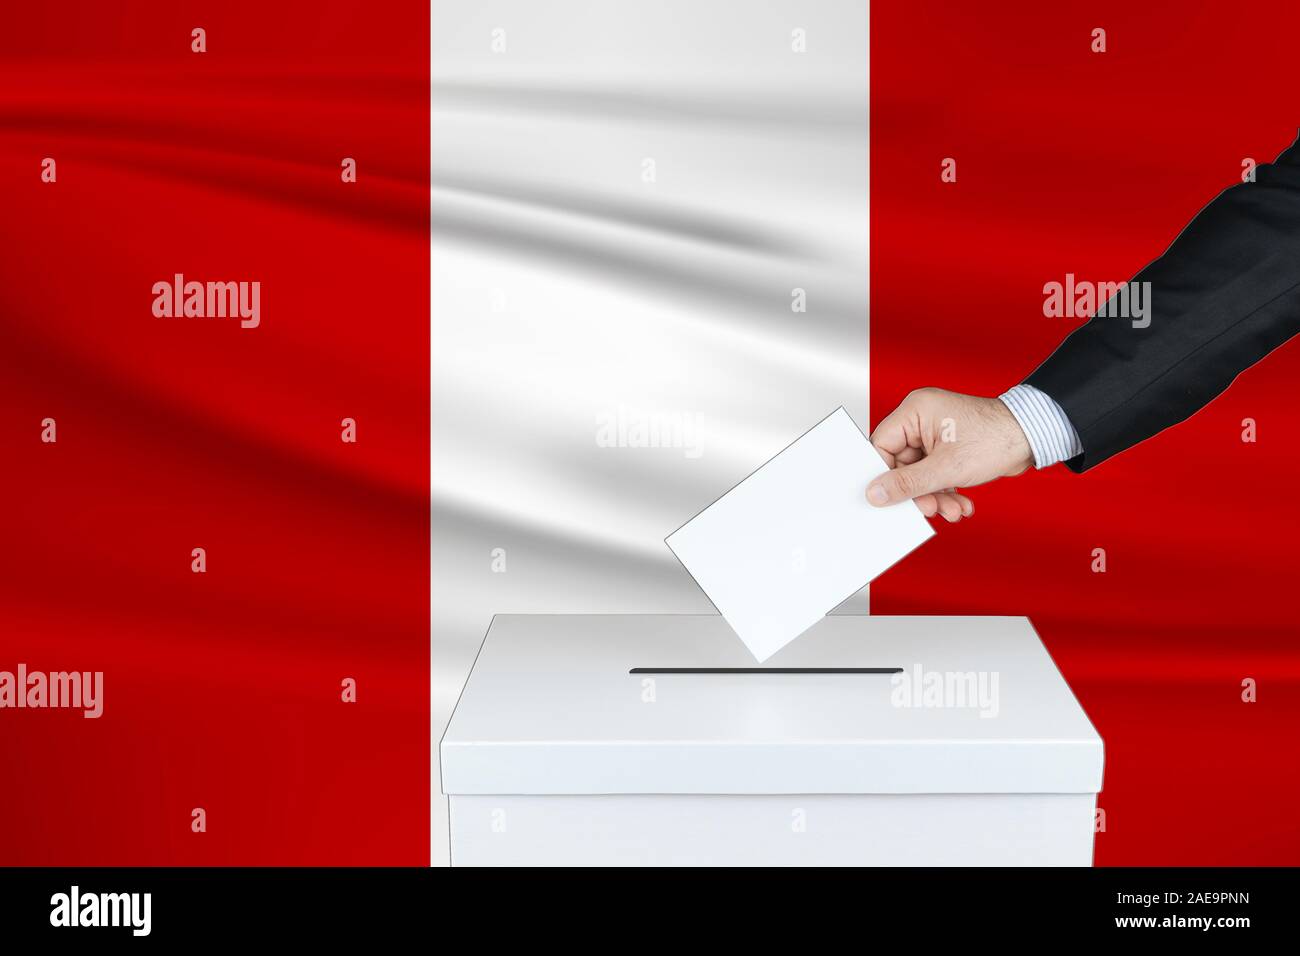 Election in Peru. The hand of man putting his vote in the ballot box. Waved Peru flag on background. Stock Photo